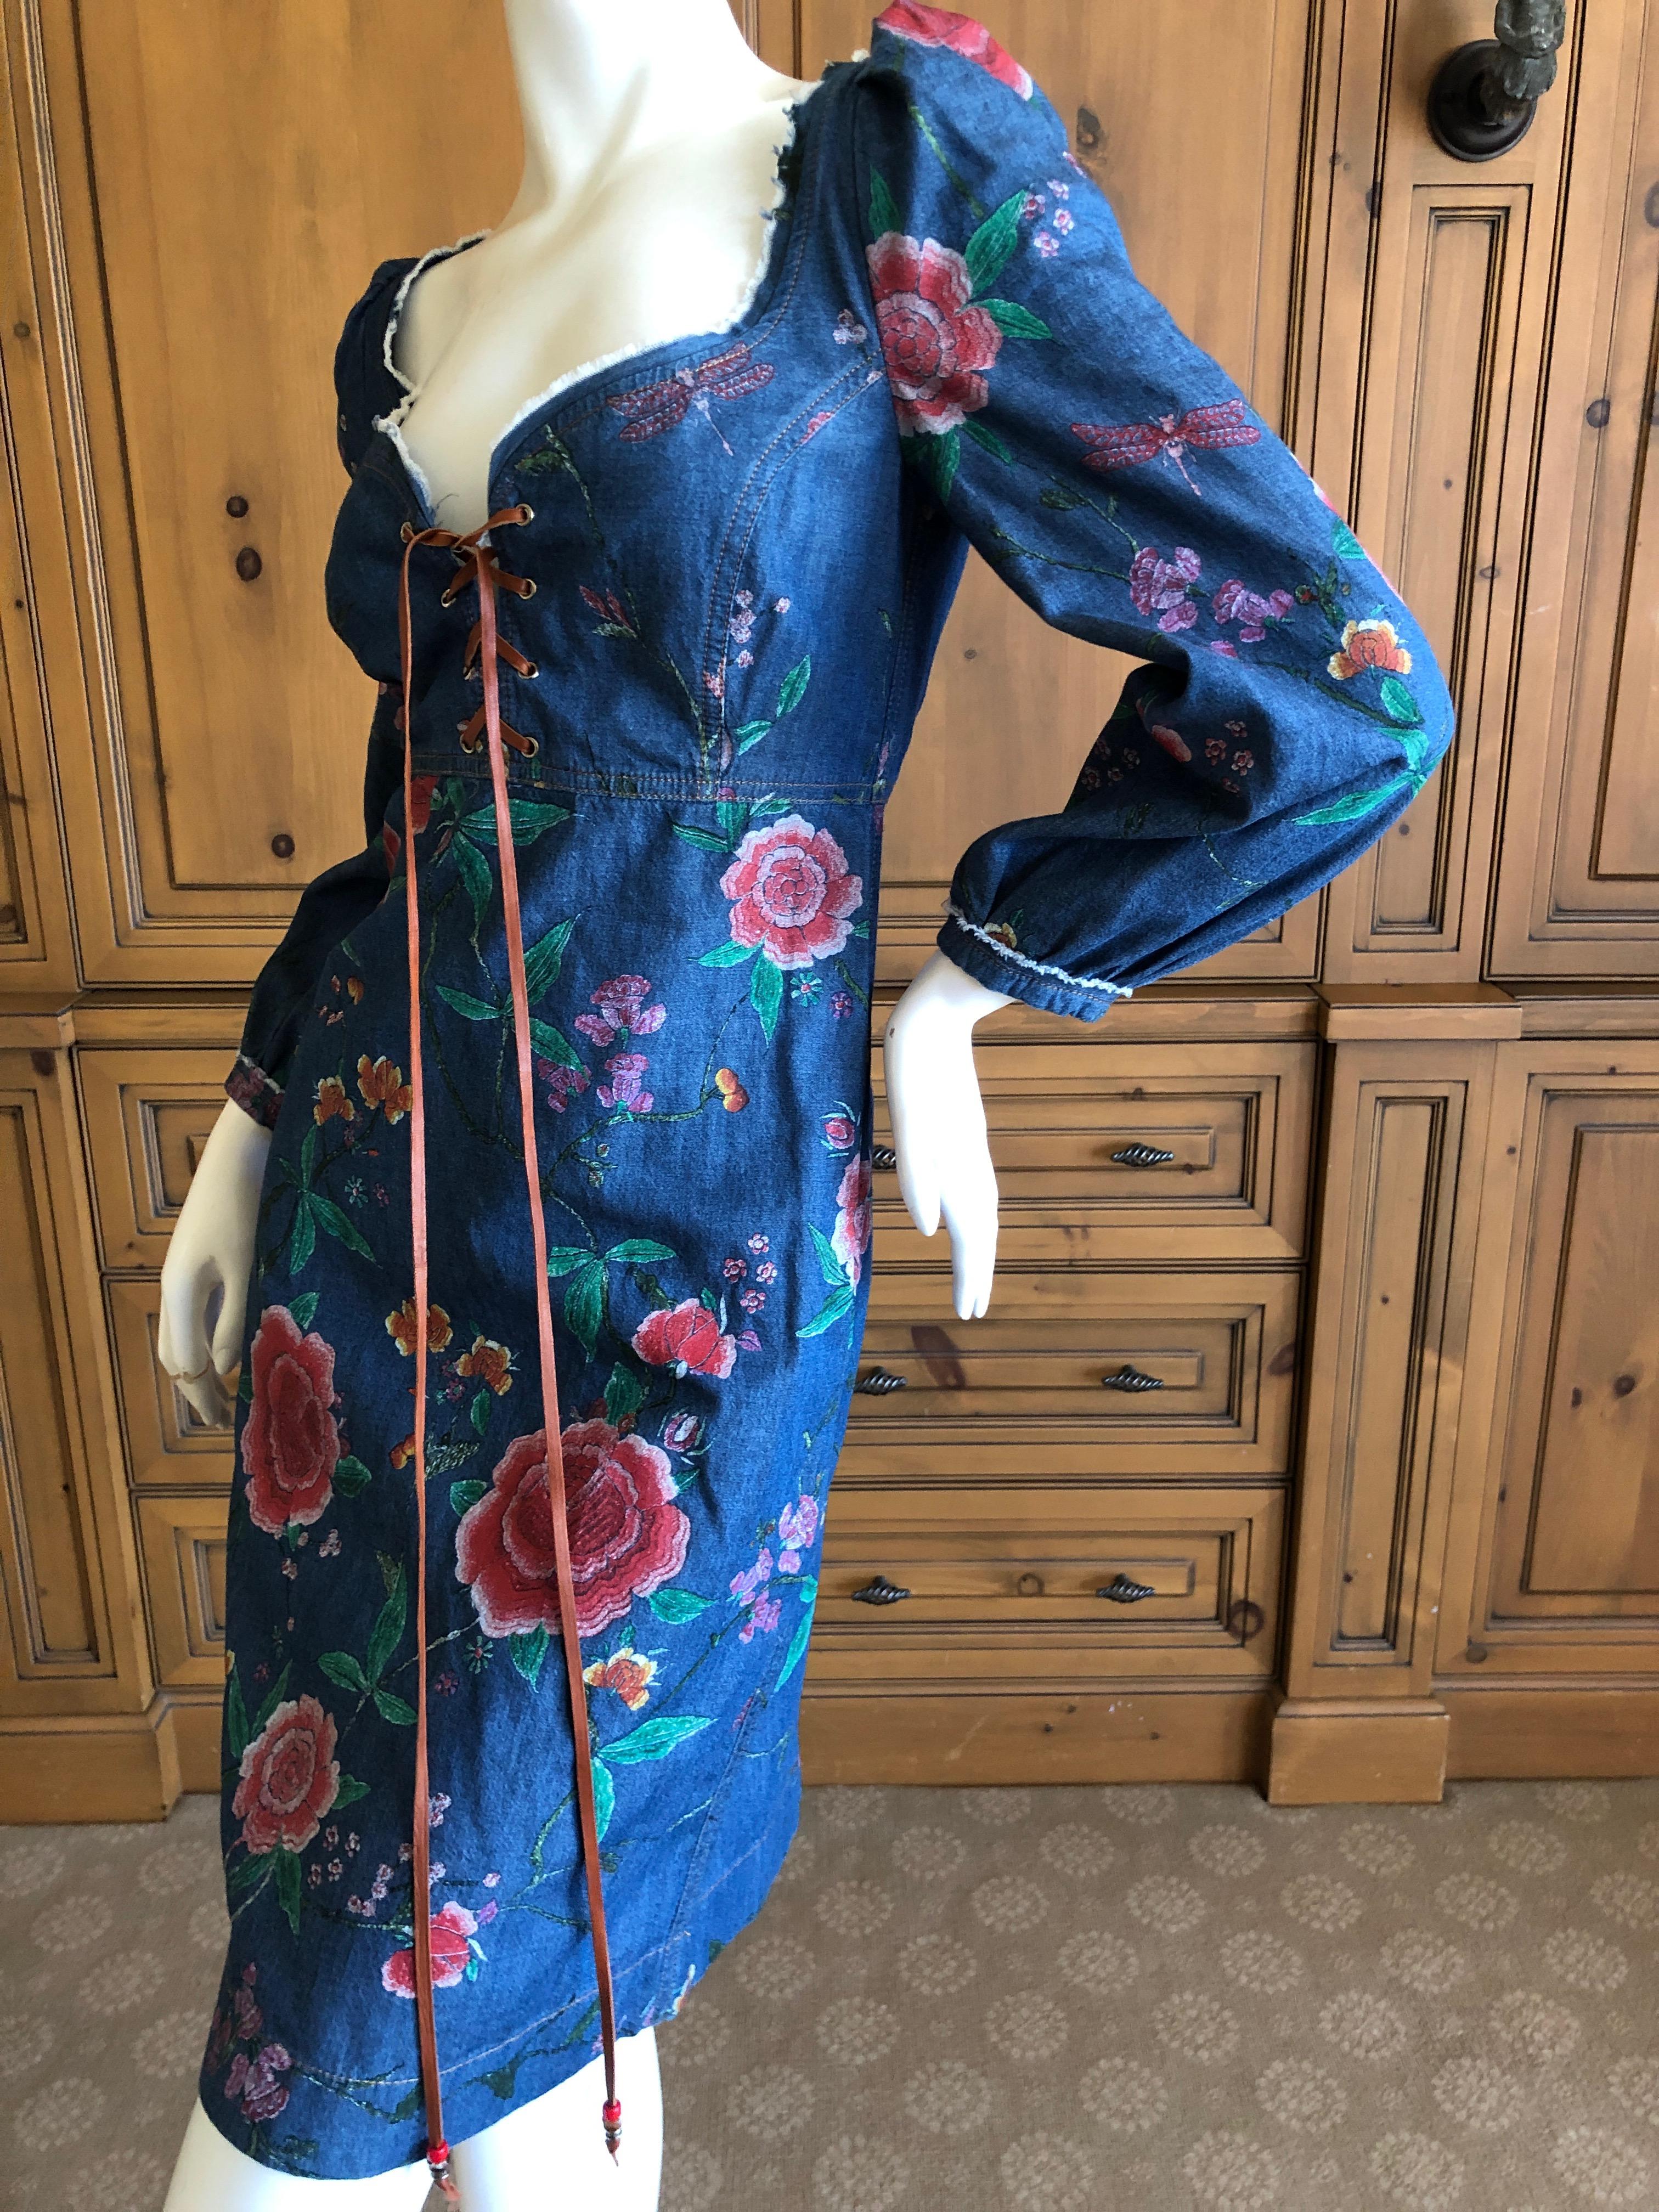 Roberto Cavalli Folkloric Rose Print Denim Cocktail Dress with Lace Up Details In Excellent Condition For Sale In Cloverdale, CA